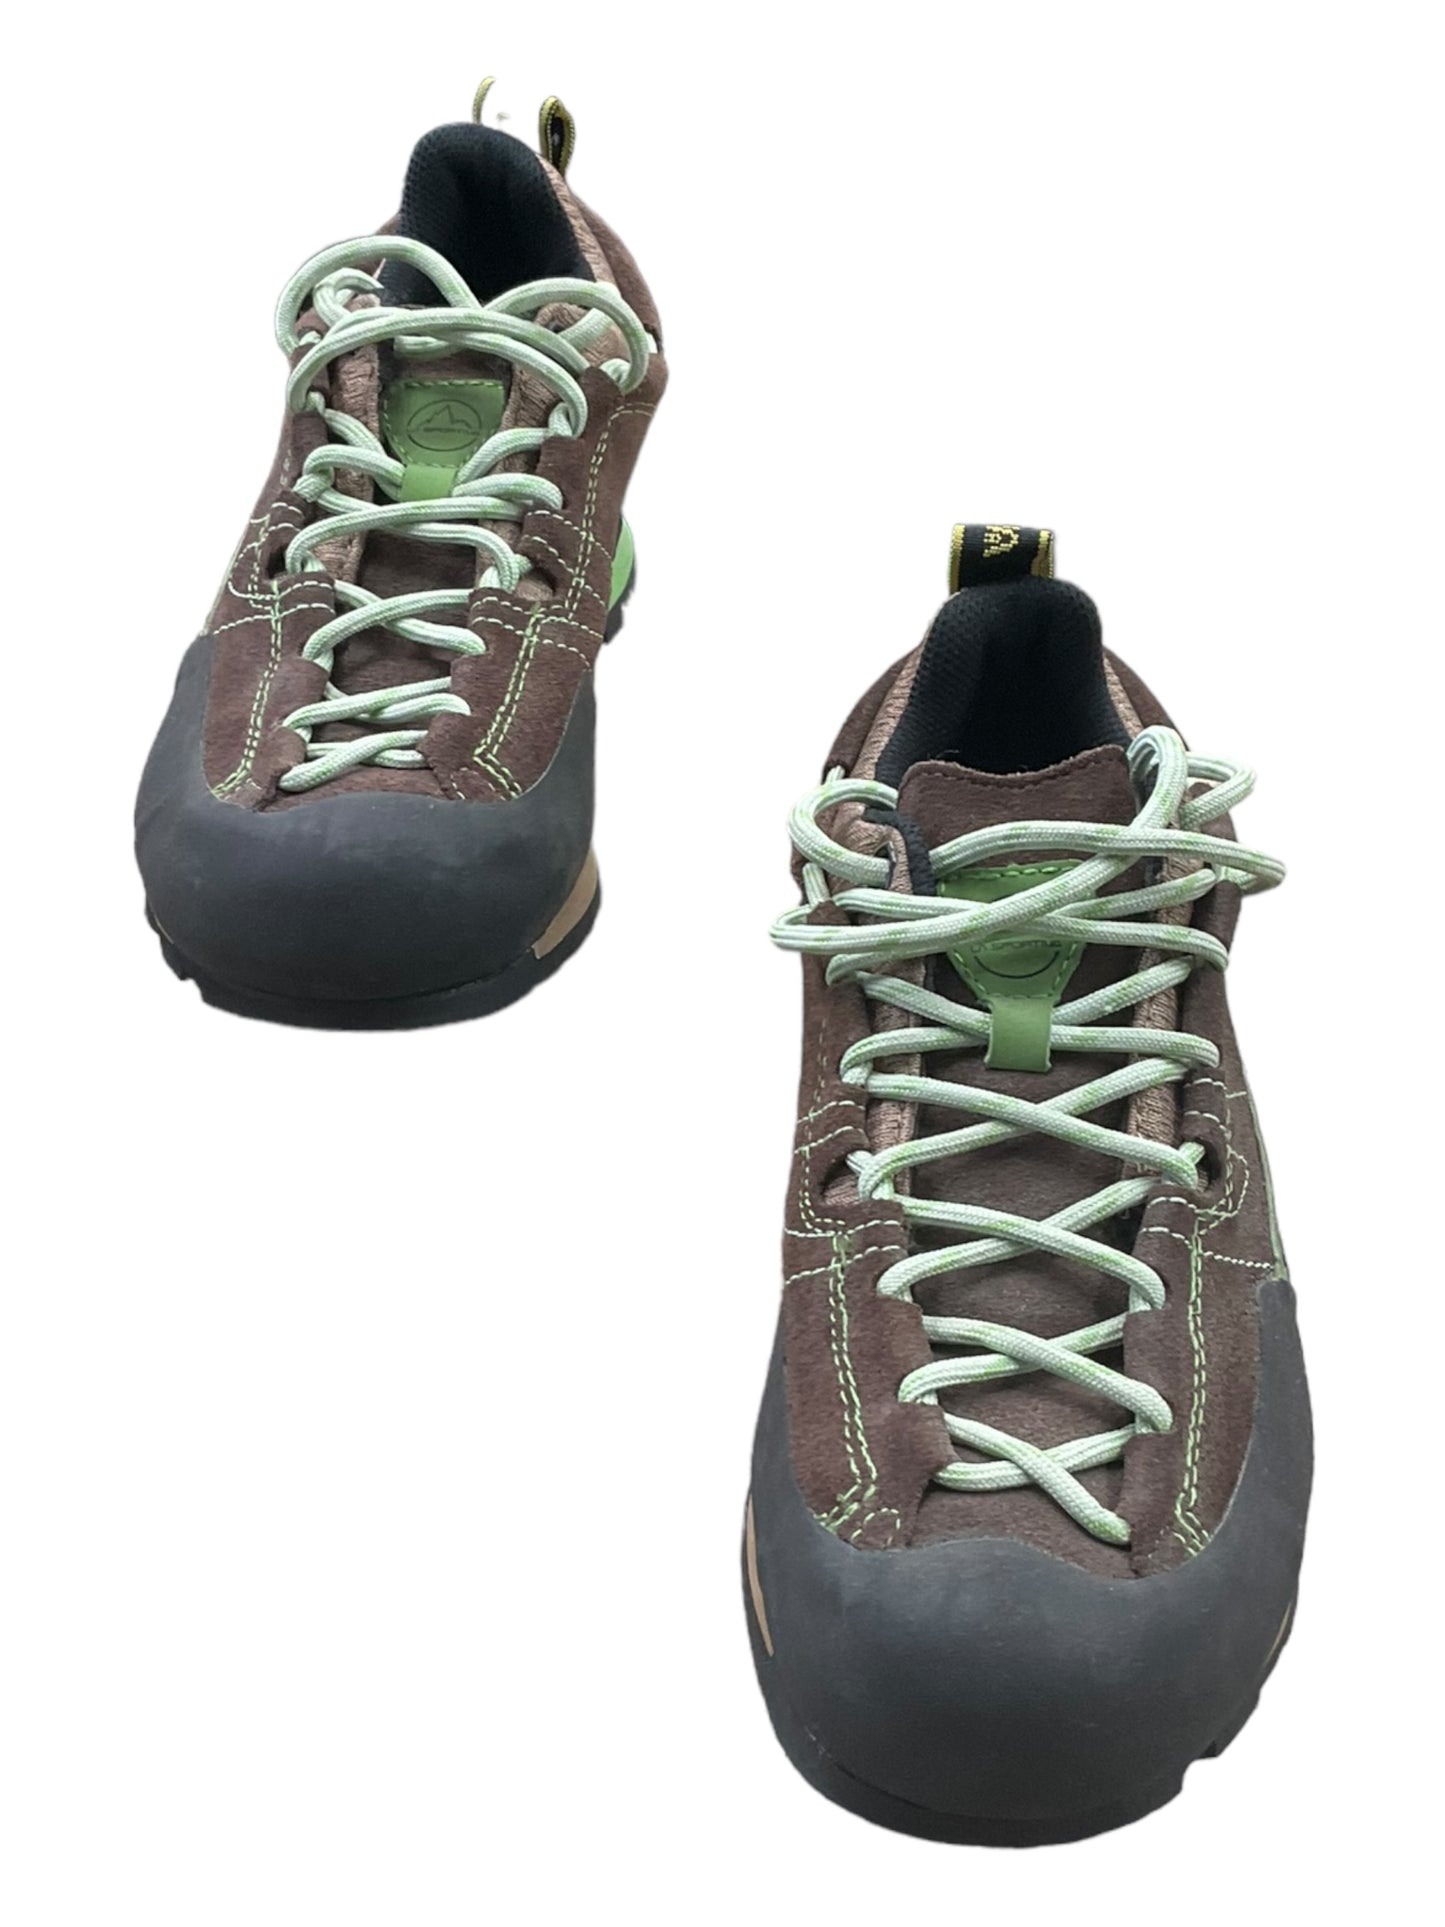 Boots Hiking By Cmc  Size: 6.5